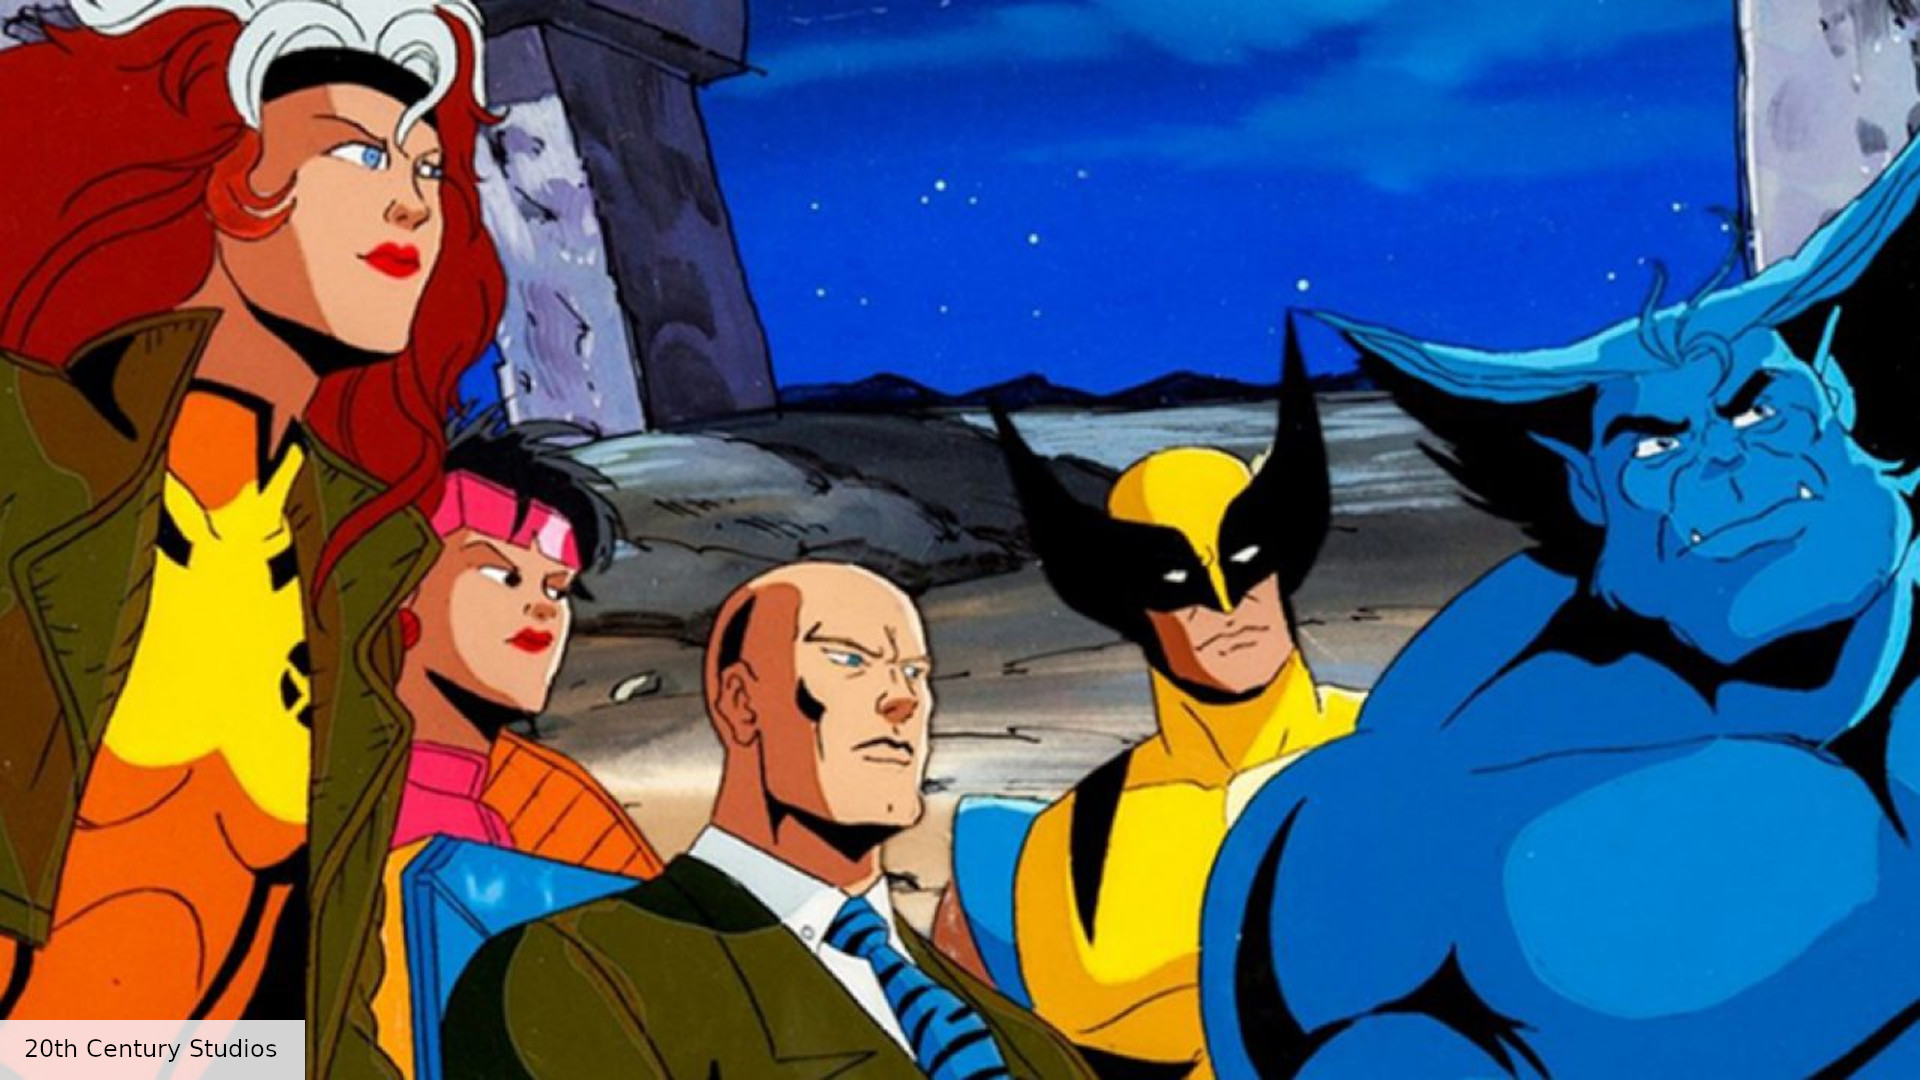 XMen ’97 release date speculation, plot, cast, and more The Digital Fix